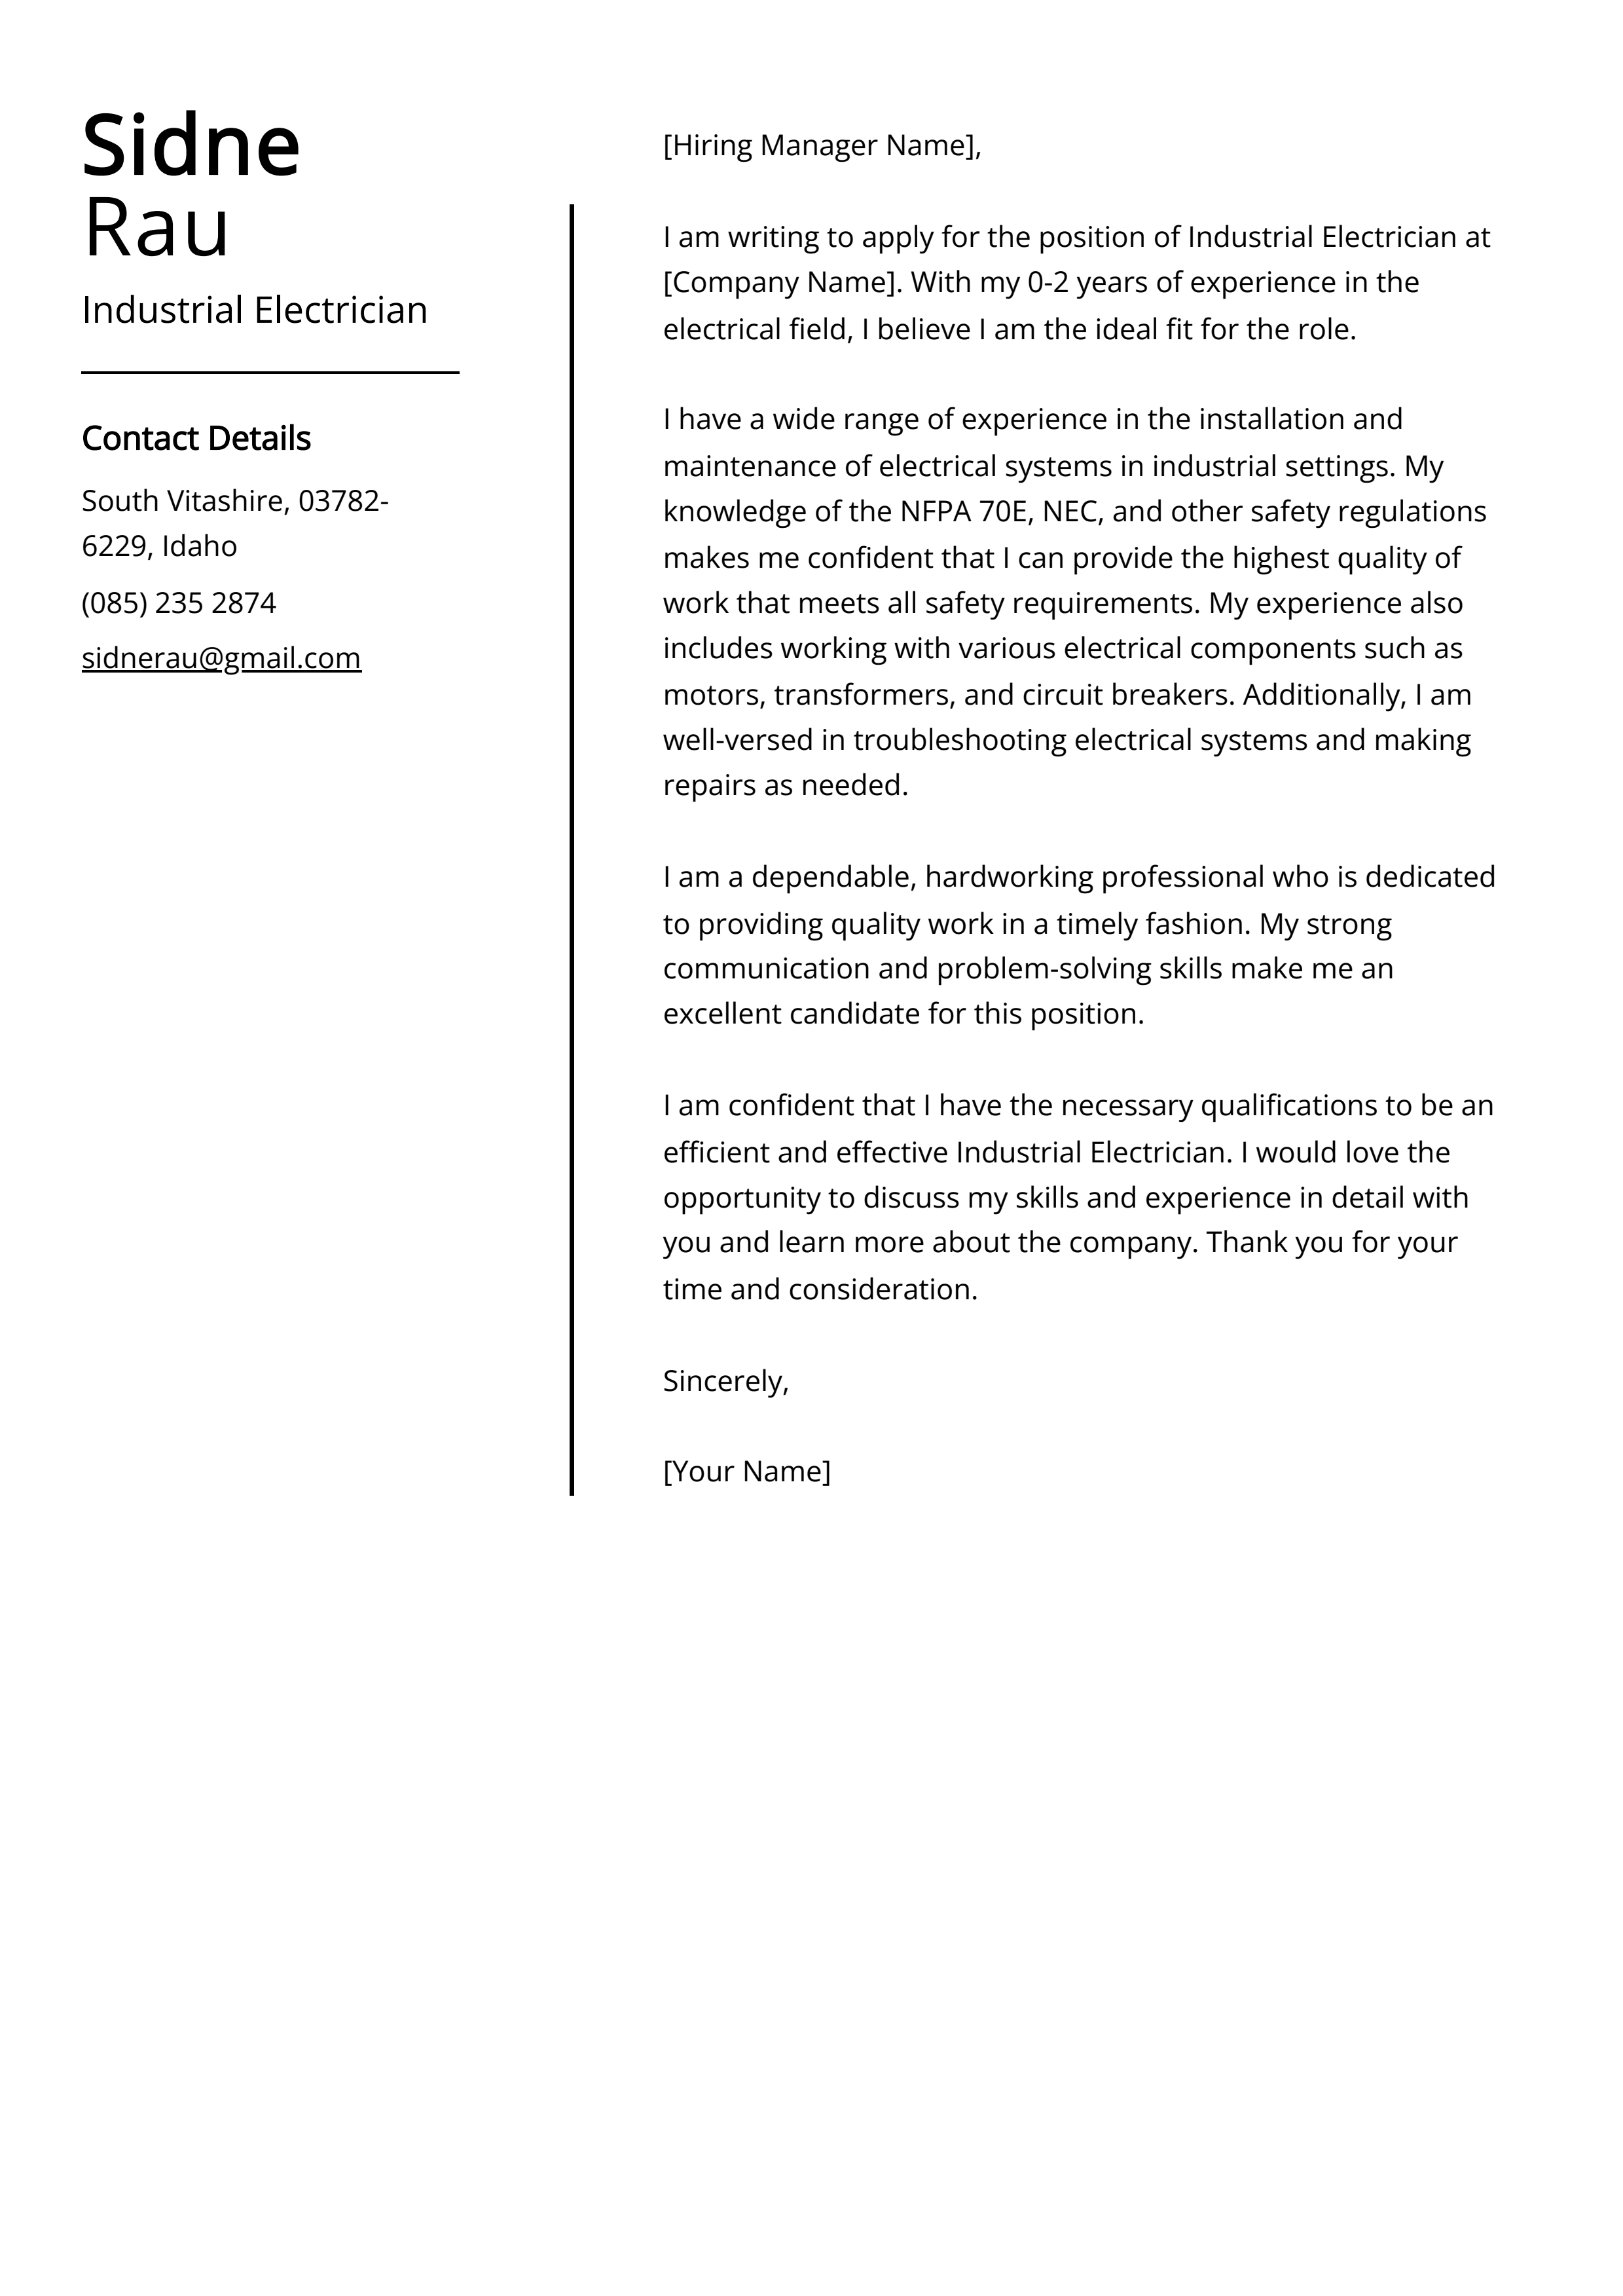 Industrial Electrician Cover Letter Example